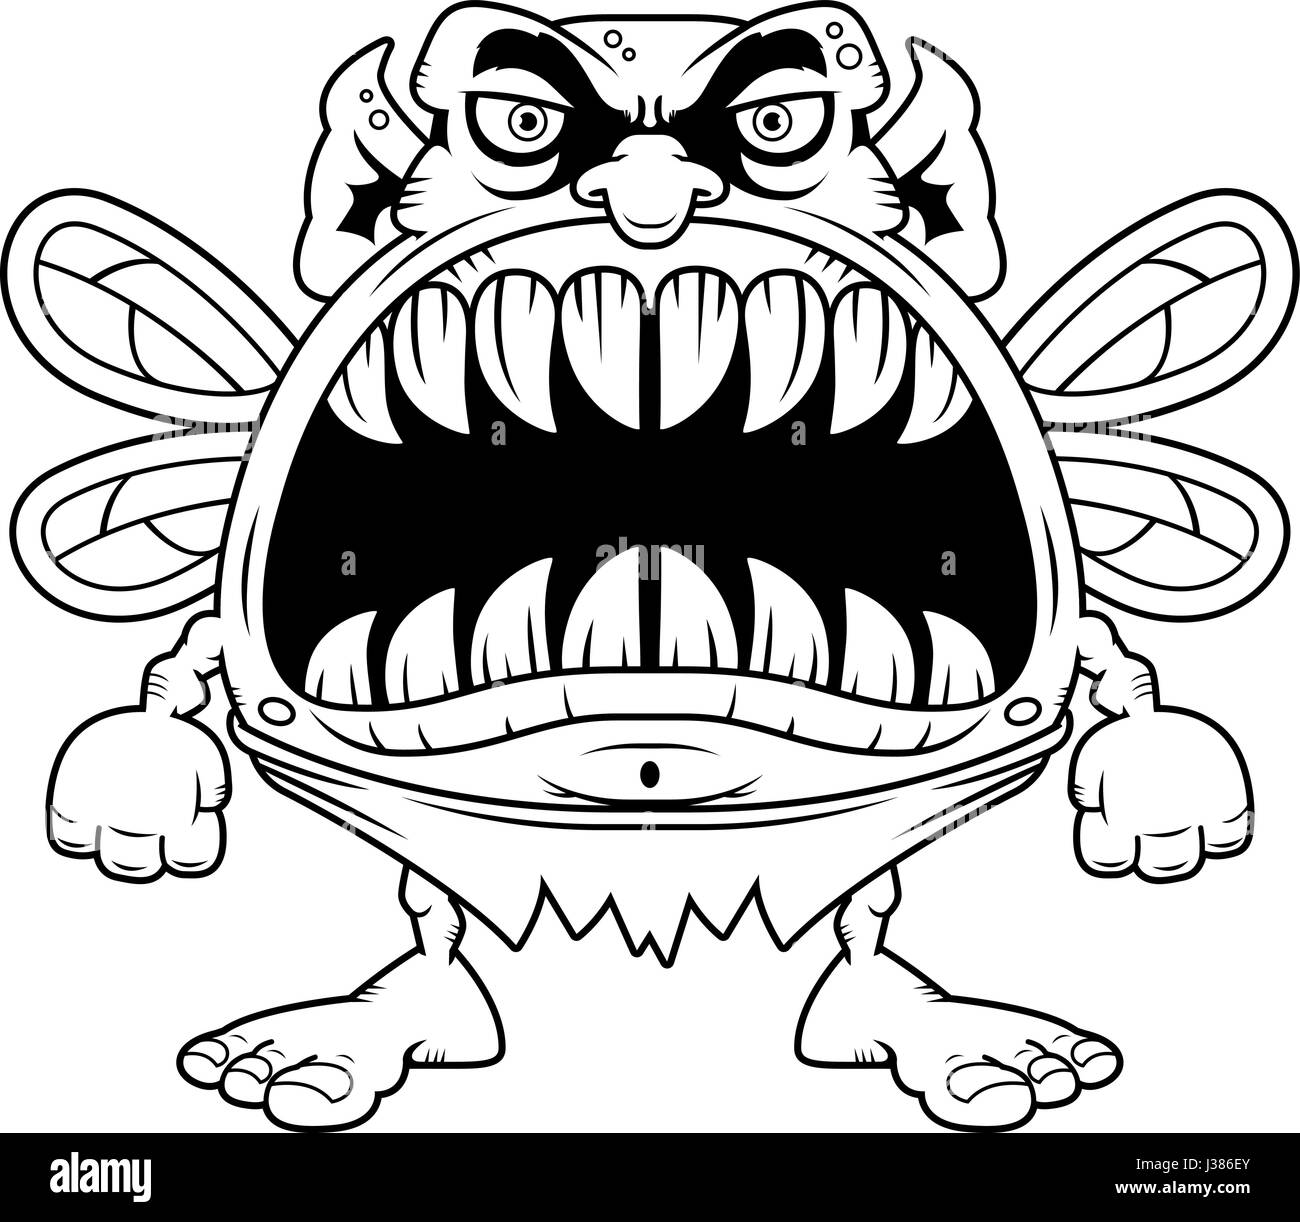 Monster with Frowning Face and Scary Eyes Stock Image - Image of magician,  fairy: 125957257